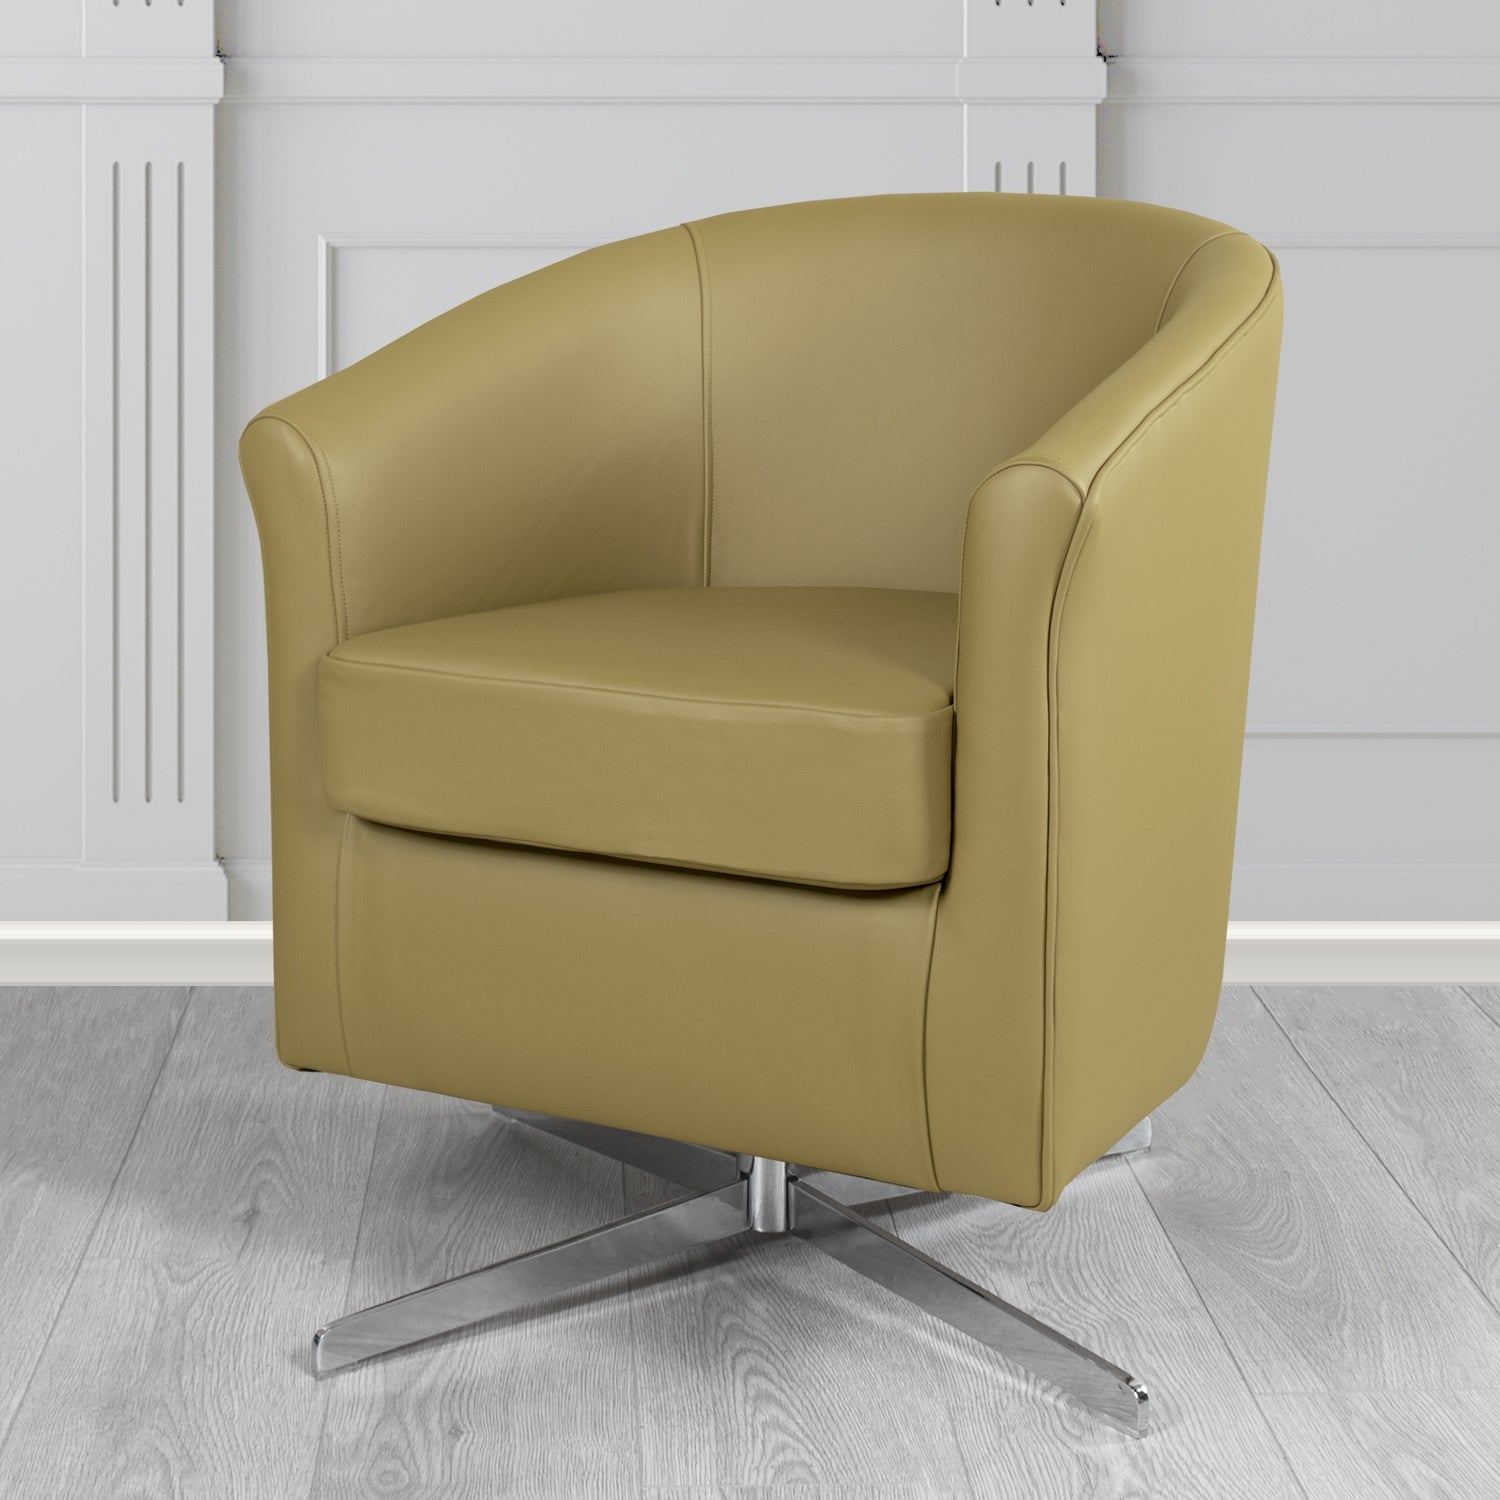 Cannes Swivel Tub Chair in Shelly Golders Green Crib 5 Genuine Leather - The Tub Chair Shop